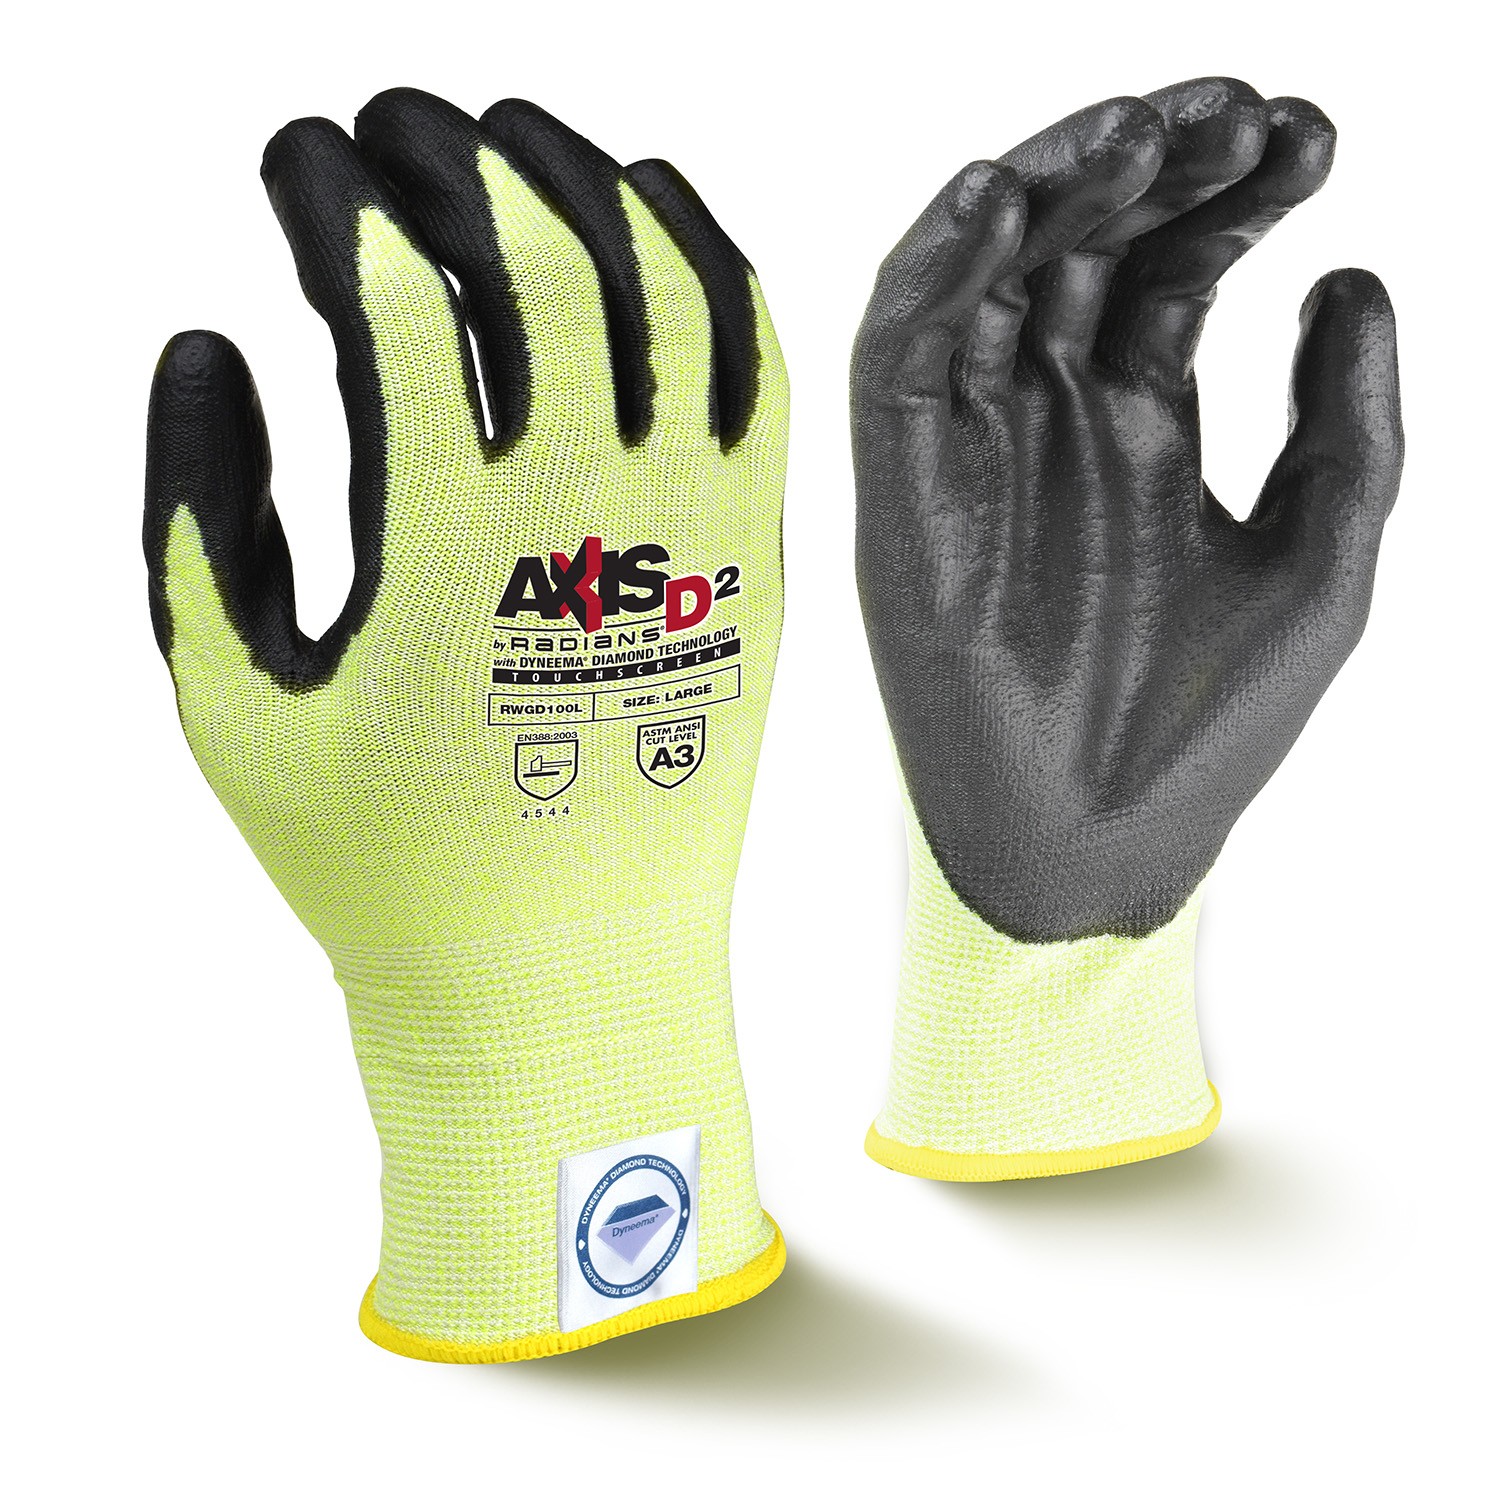 AXIS D2™Cut Protection Level A3 Touchscreen Glove with Dyneema® Diamond Technology (#RWGD100)